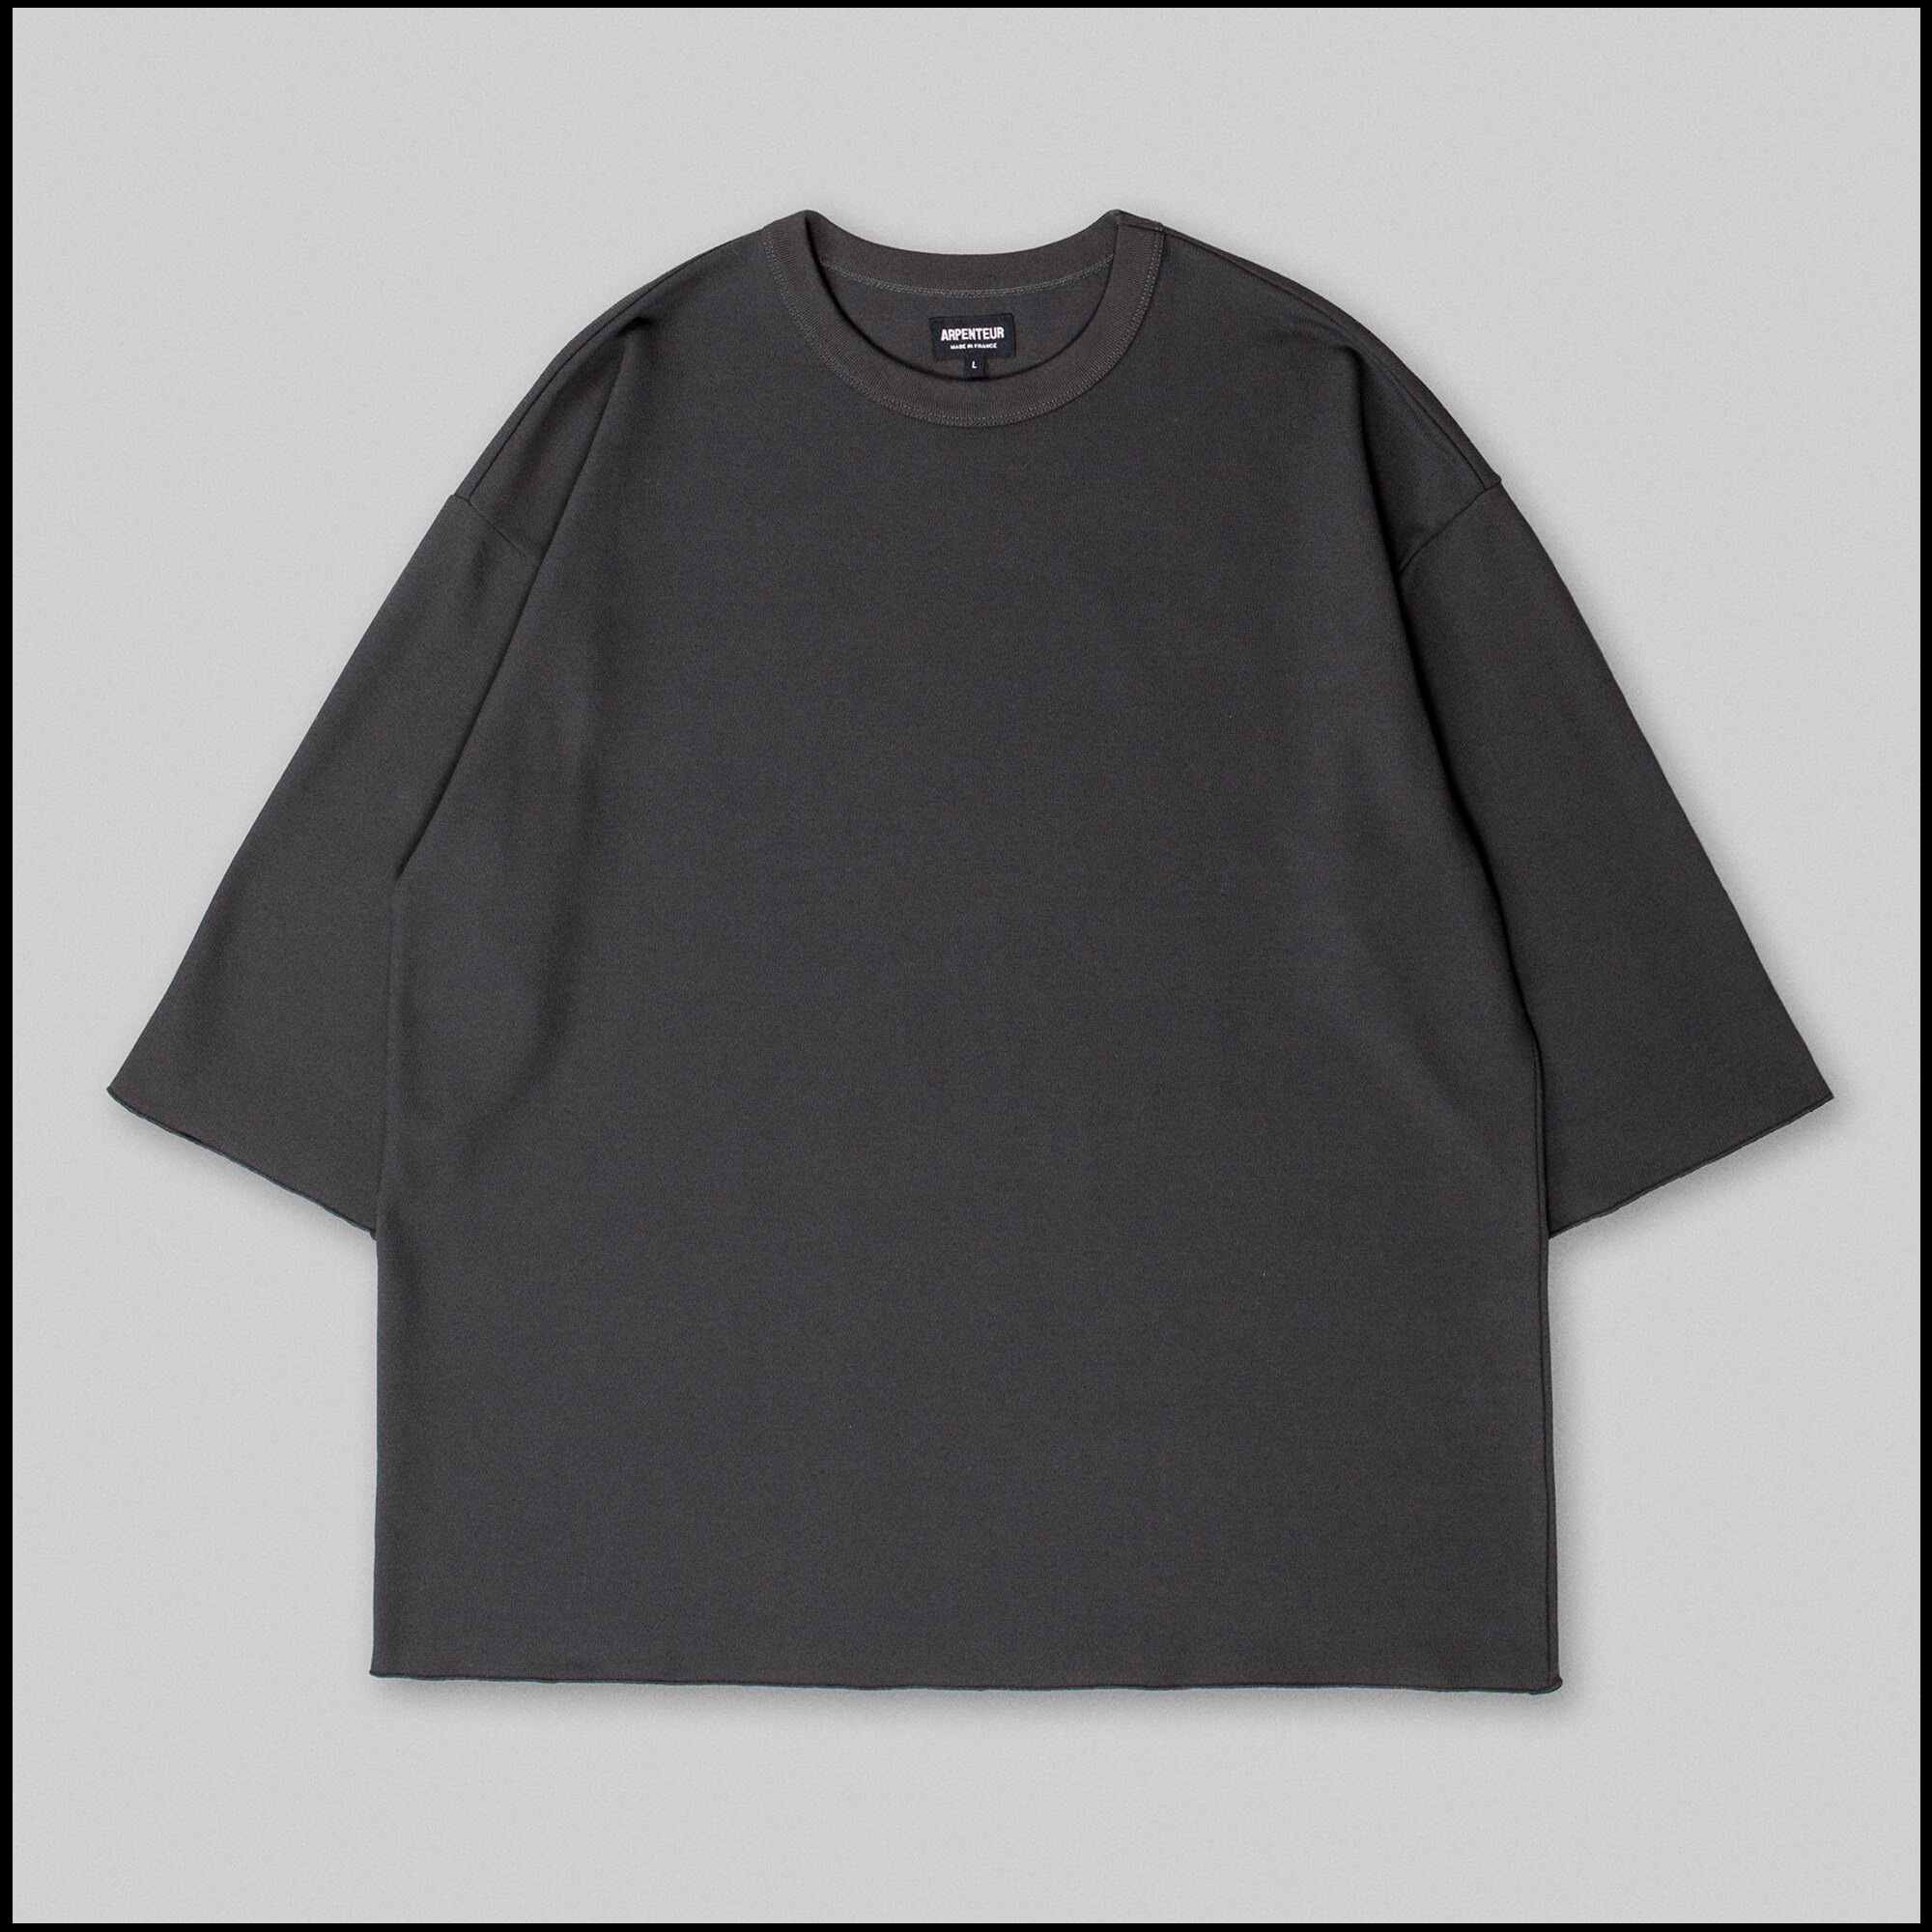 MARINIERE t-shirt by Arpenteur in Charcoal color